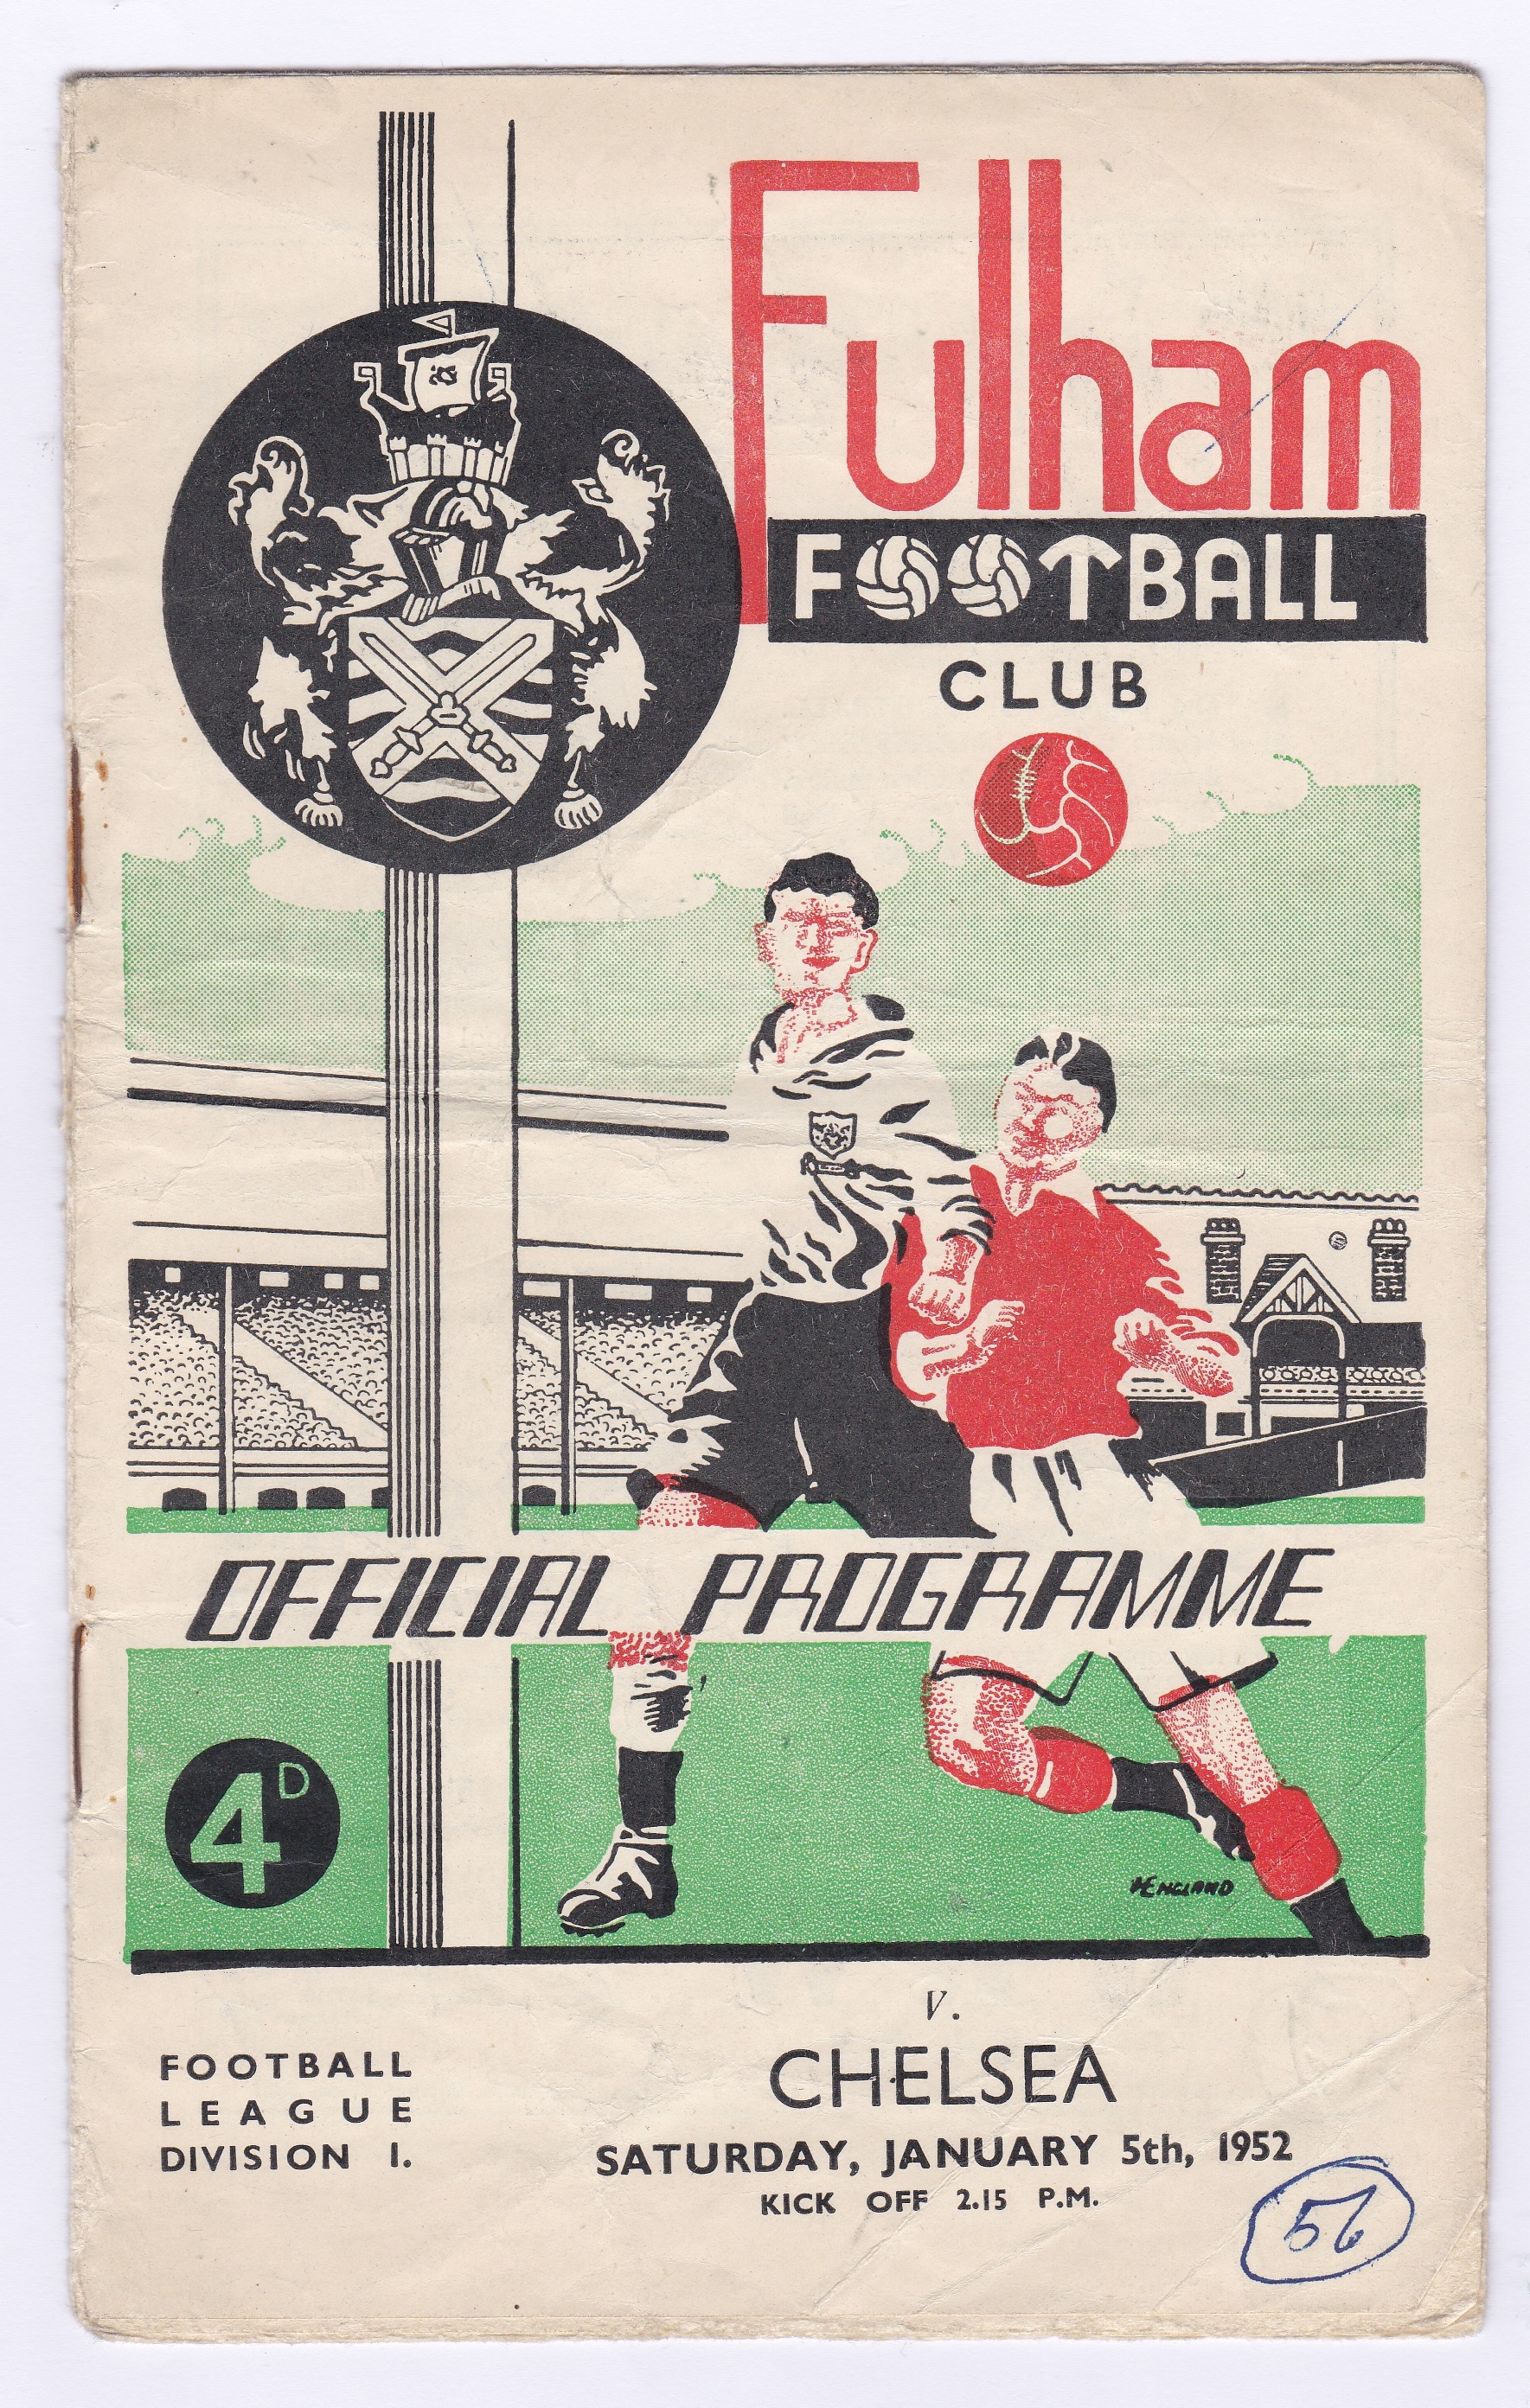 Fulham v Chelsea 1952 5th January Football league Division 1 rusty staples horizontal crease some